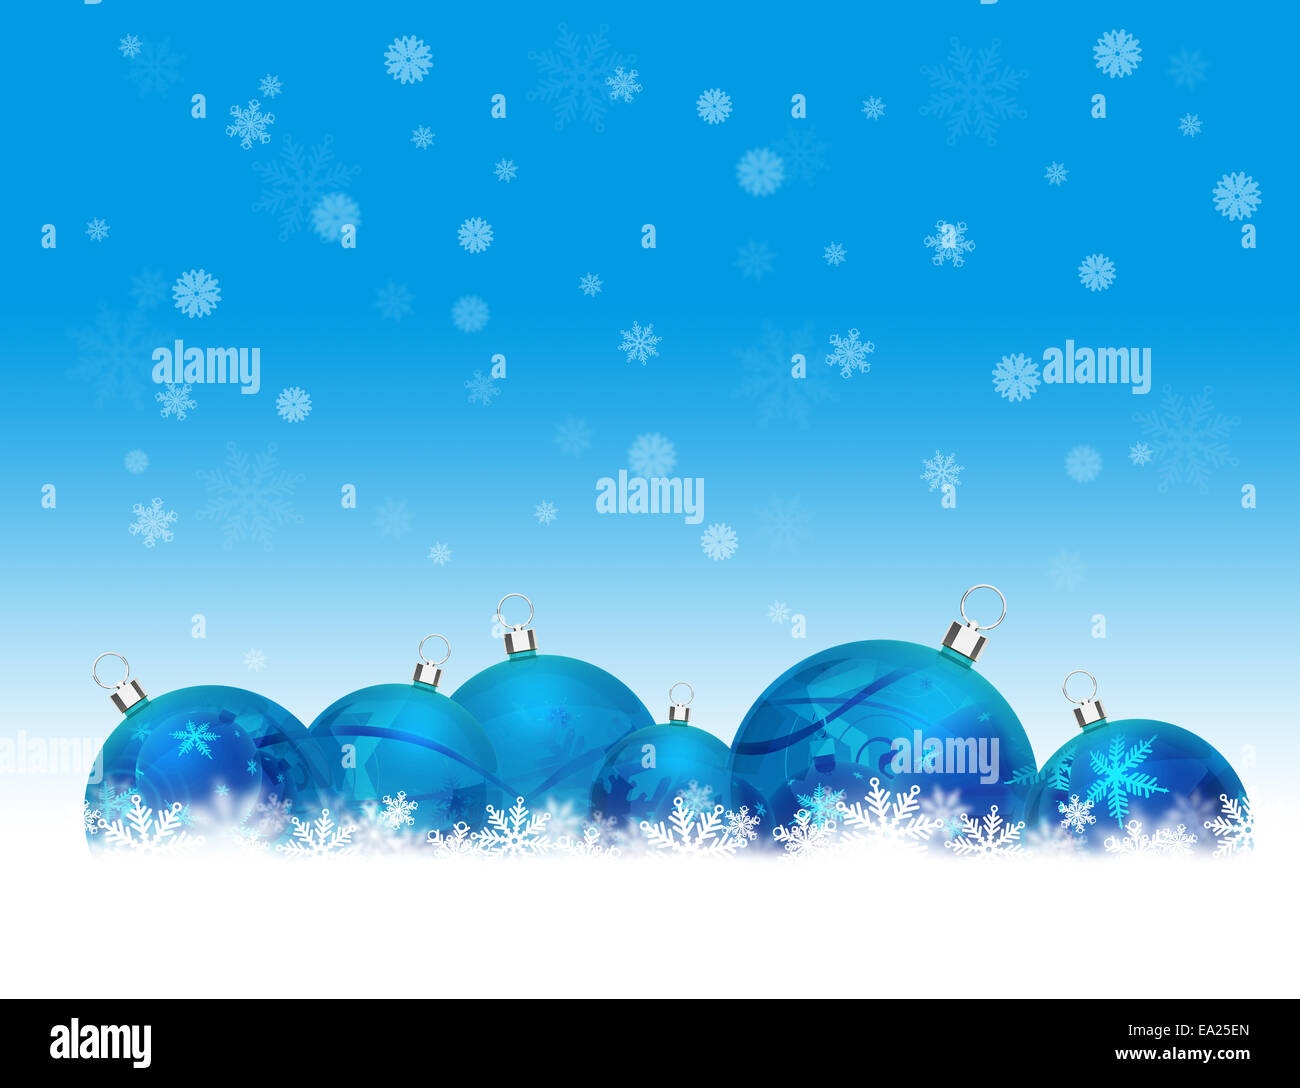 Christmas background for your design. Stock Photo